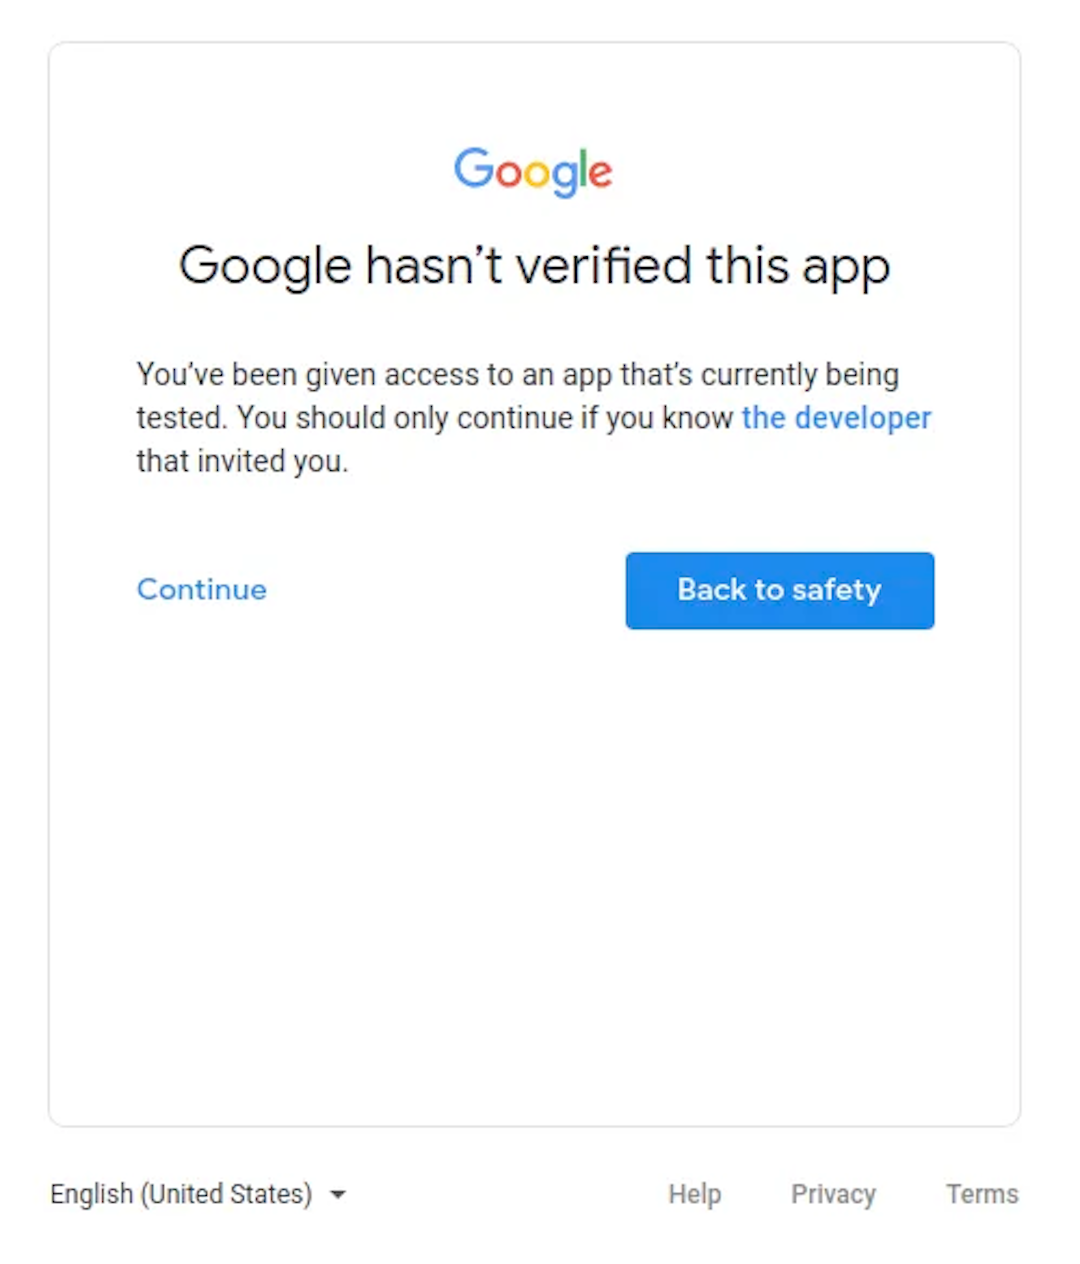 Warning screen from Google indicating the app has not been verified, with a message advising to proceed only if the developer is known, alongside two buttons: 'Continue' and 'Back to safety'.